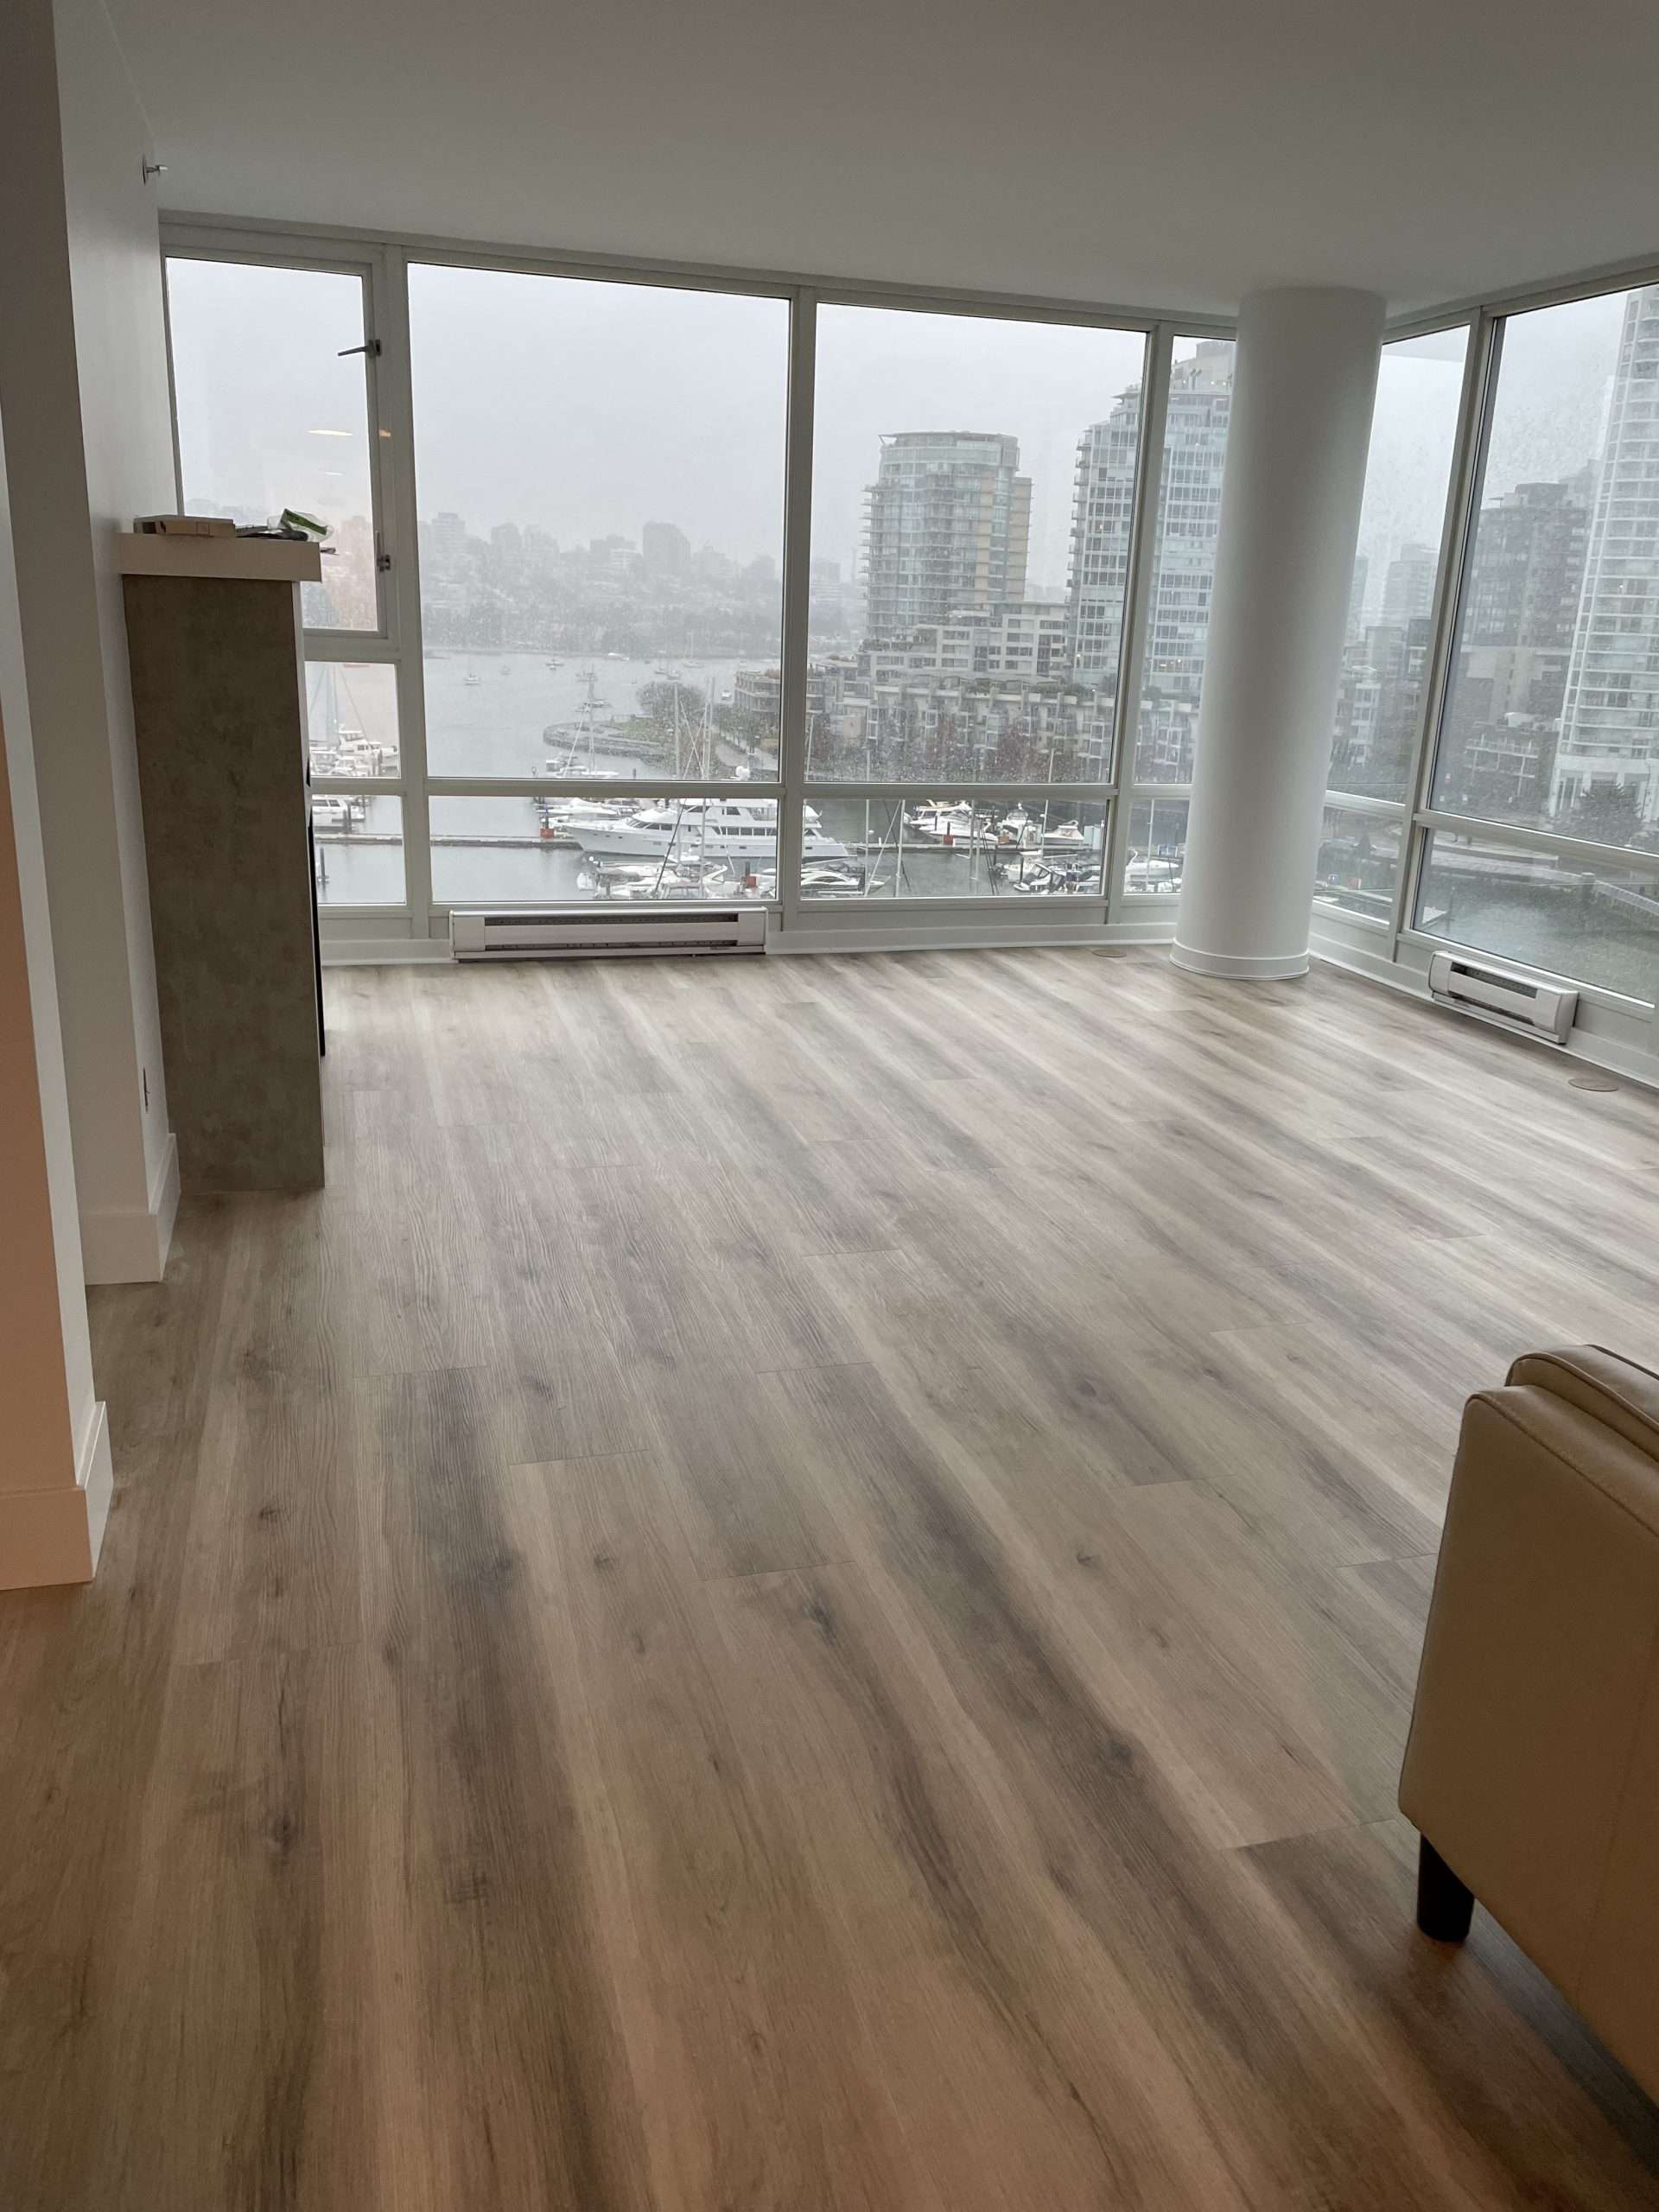 Vinyl plank installers ensure flawless  installation. Transform your space today.